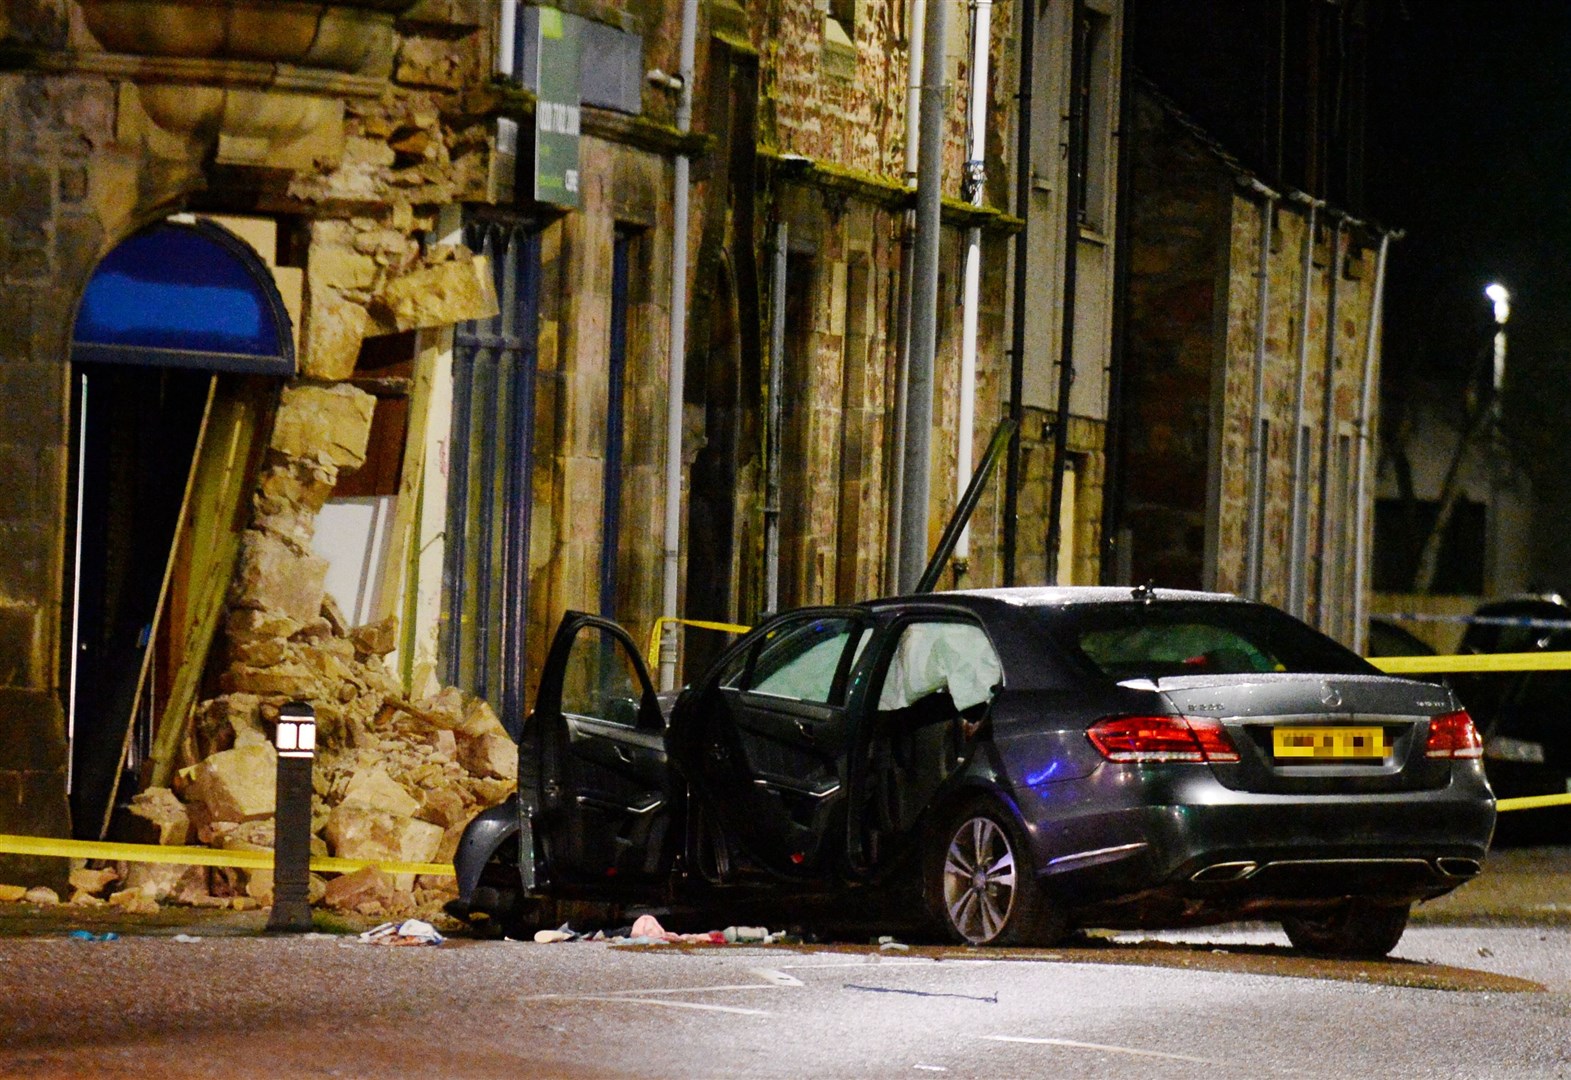 The car hit a building. Picture: Highland News and Media.